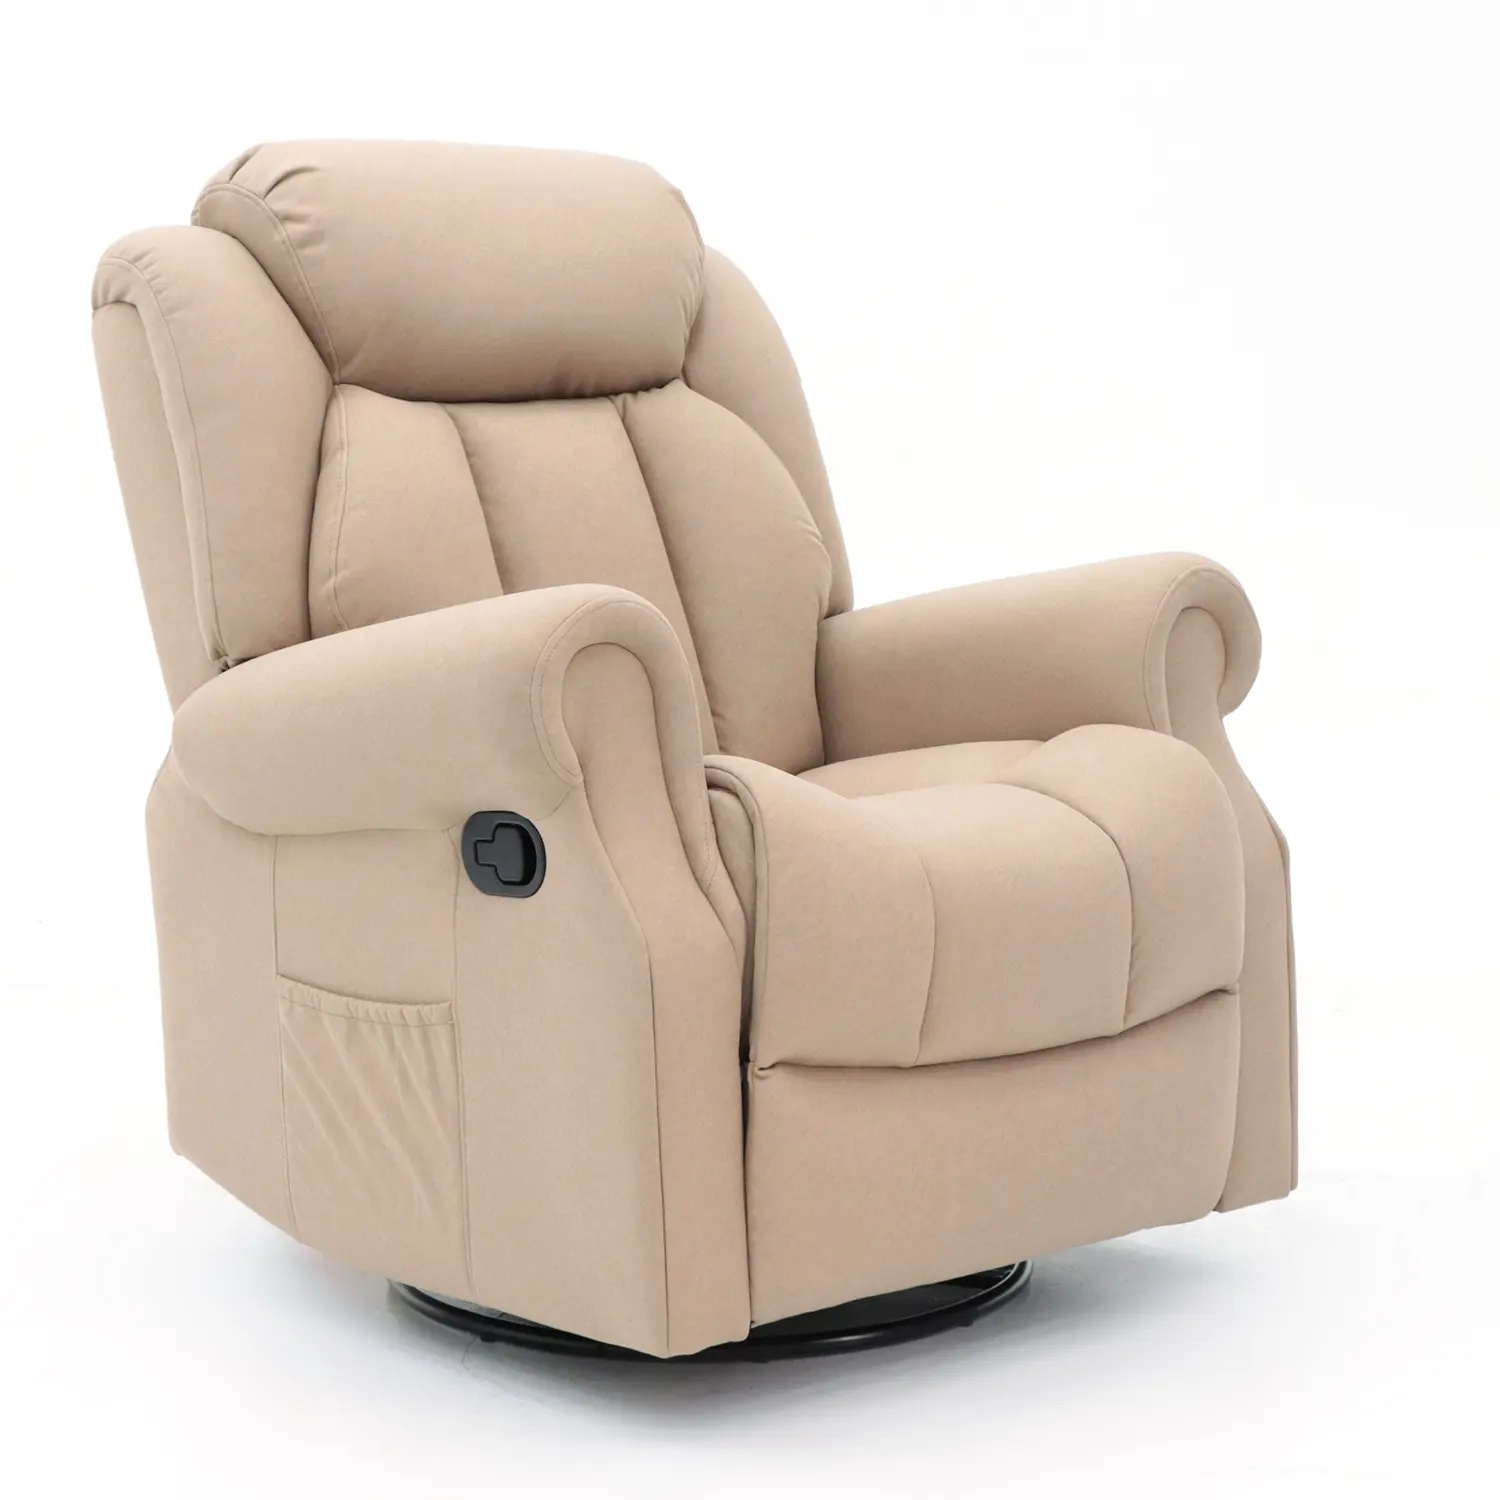 Geeksofa Factory Wholesale Lazy Boy Microfiber Fabric Manual Recliner Chair with Rocking and Swivel for Living Room Furniture